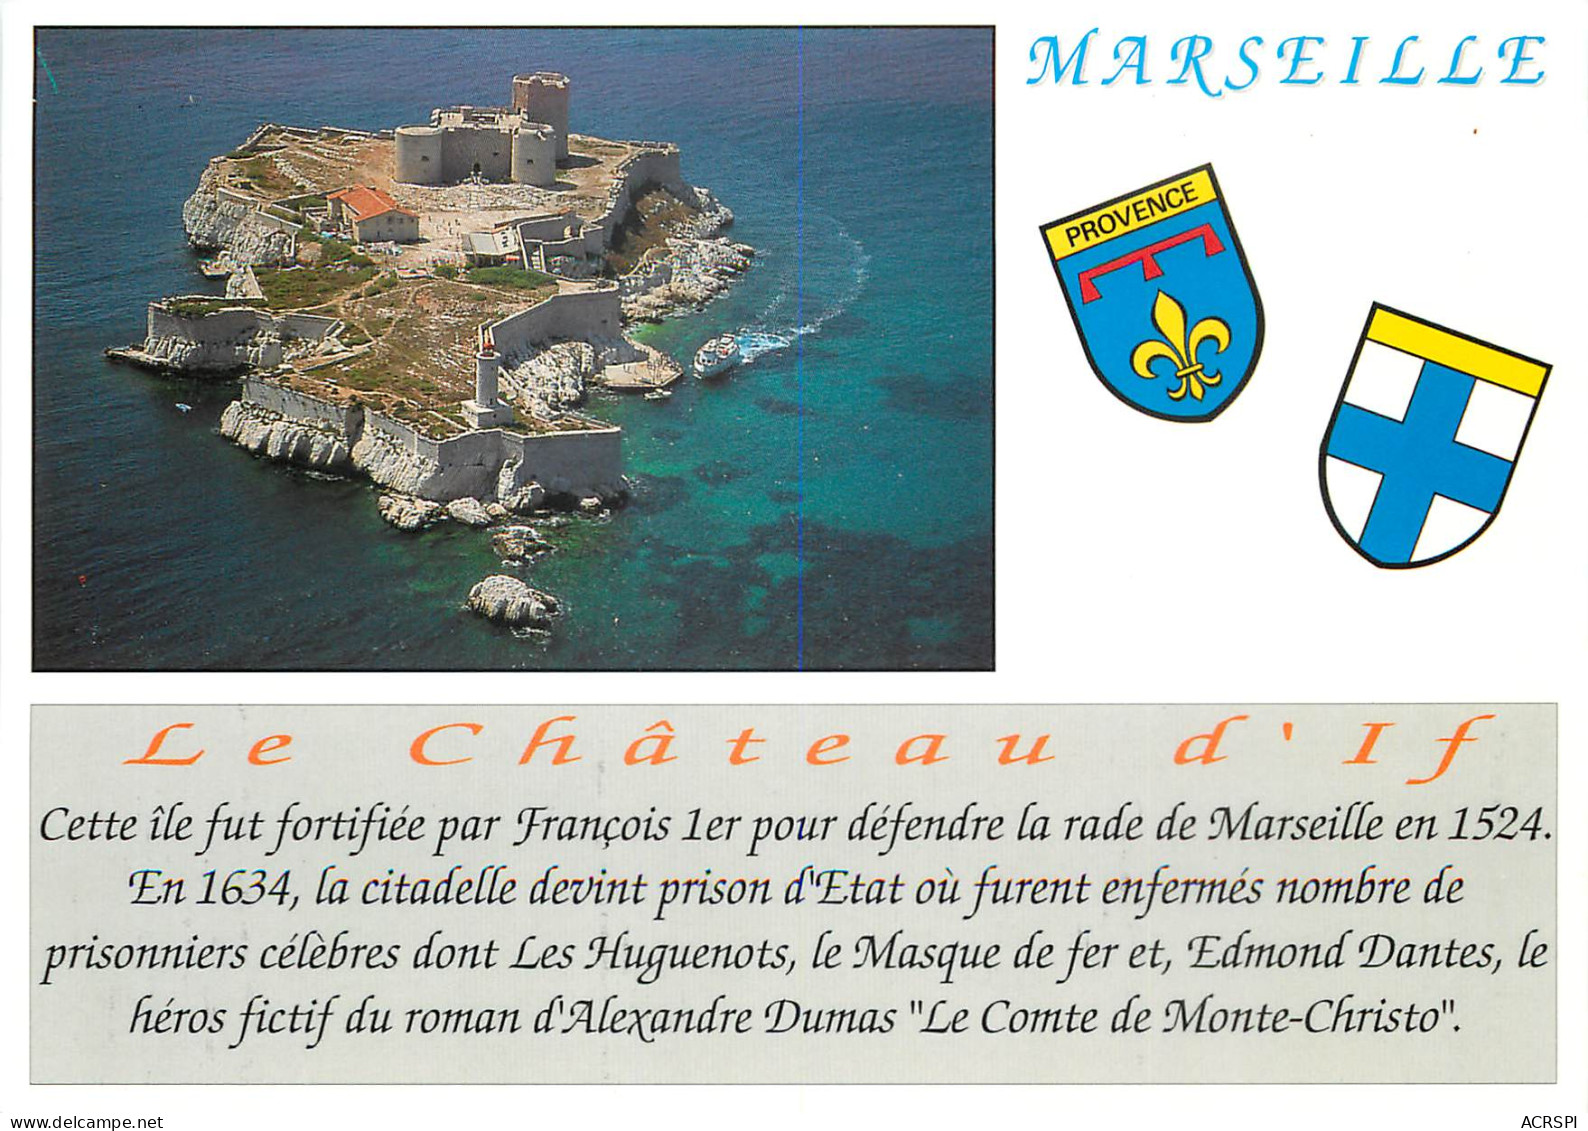 MARSEILLE Le Chateau D If 19(scan Recto-verso) ME2617 - Festung (Château D'If), Frioul, Inseln...